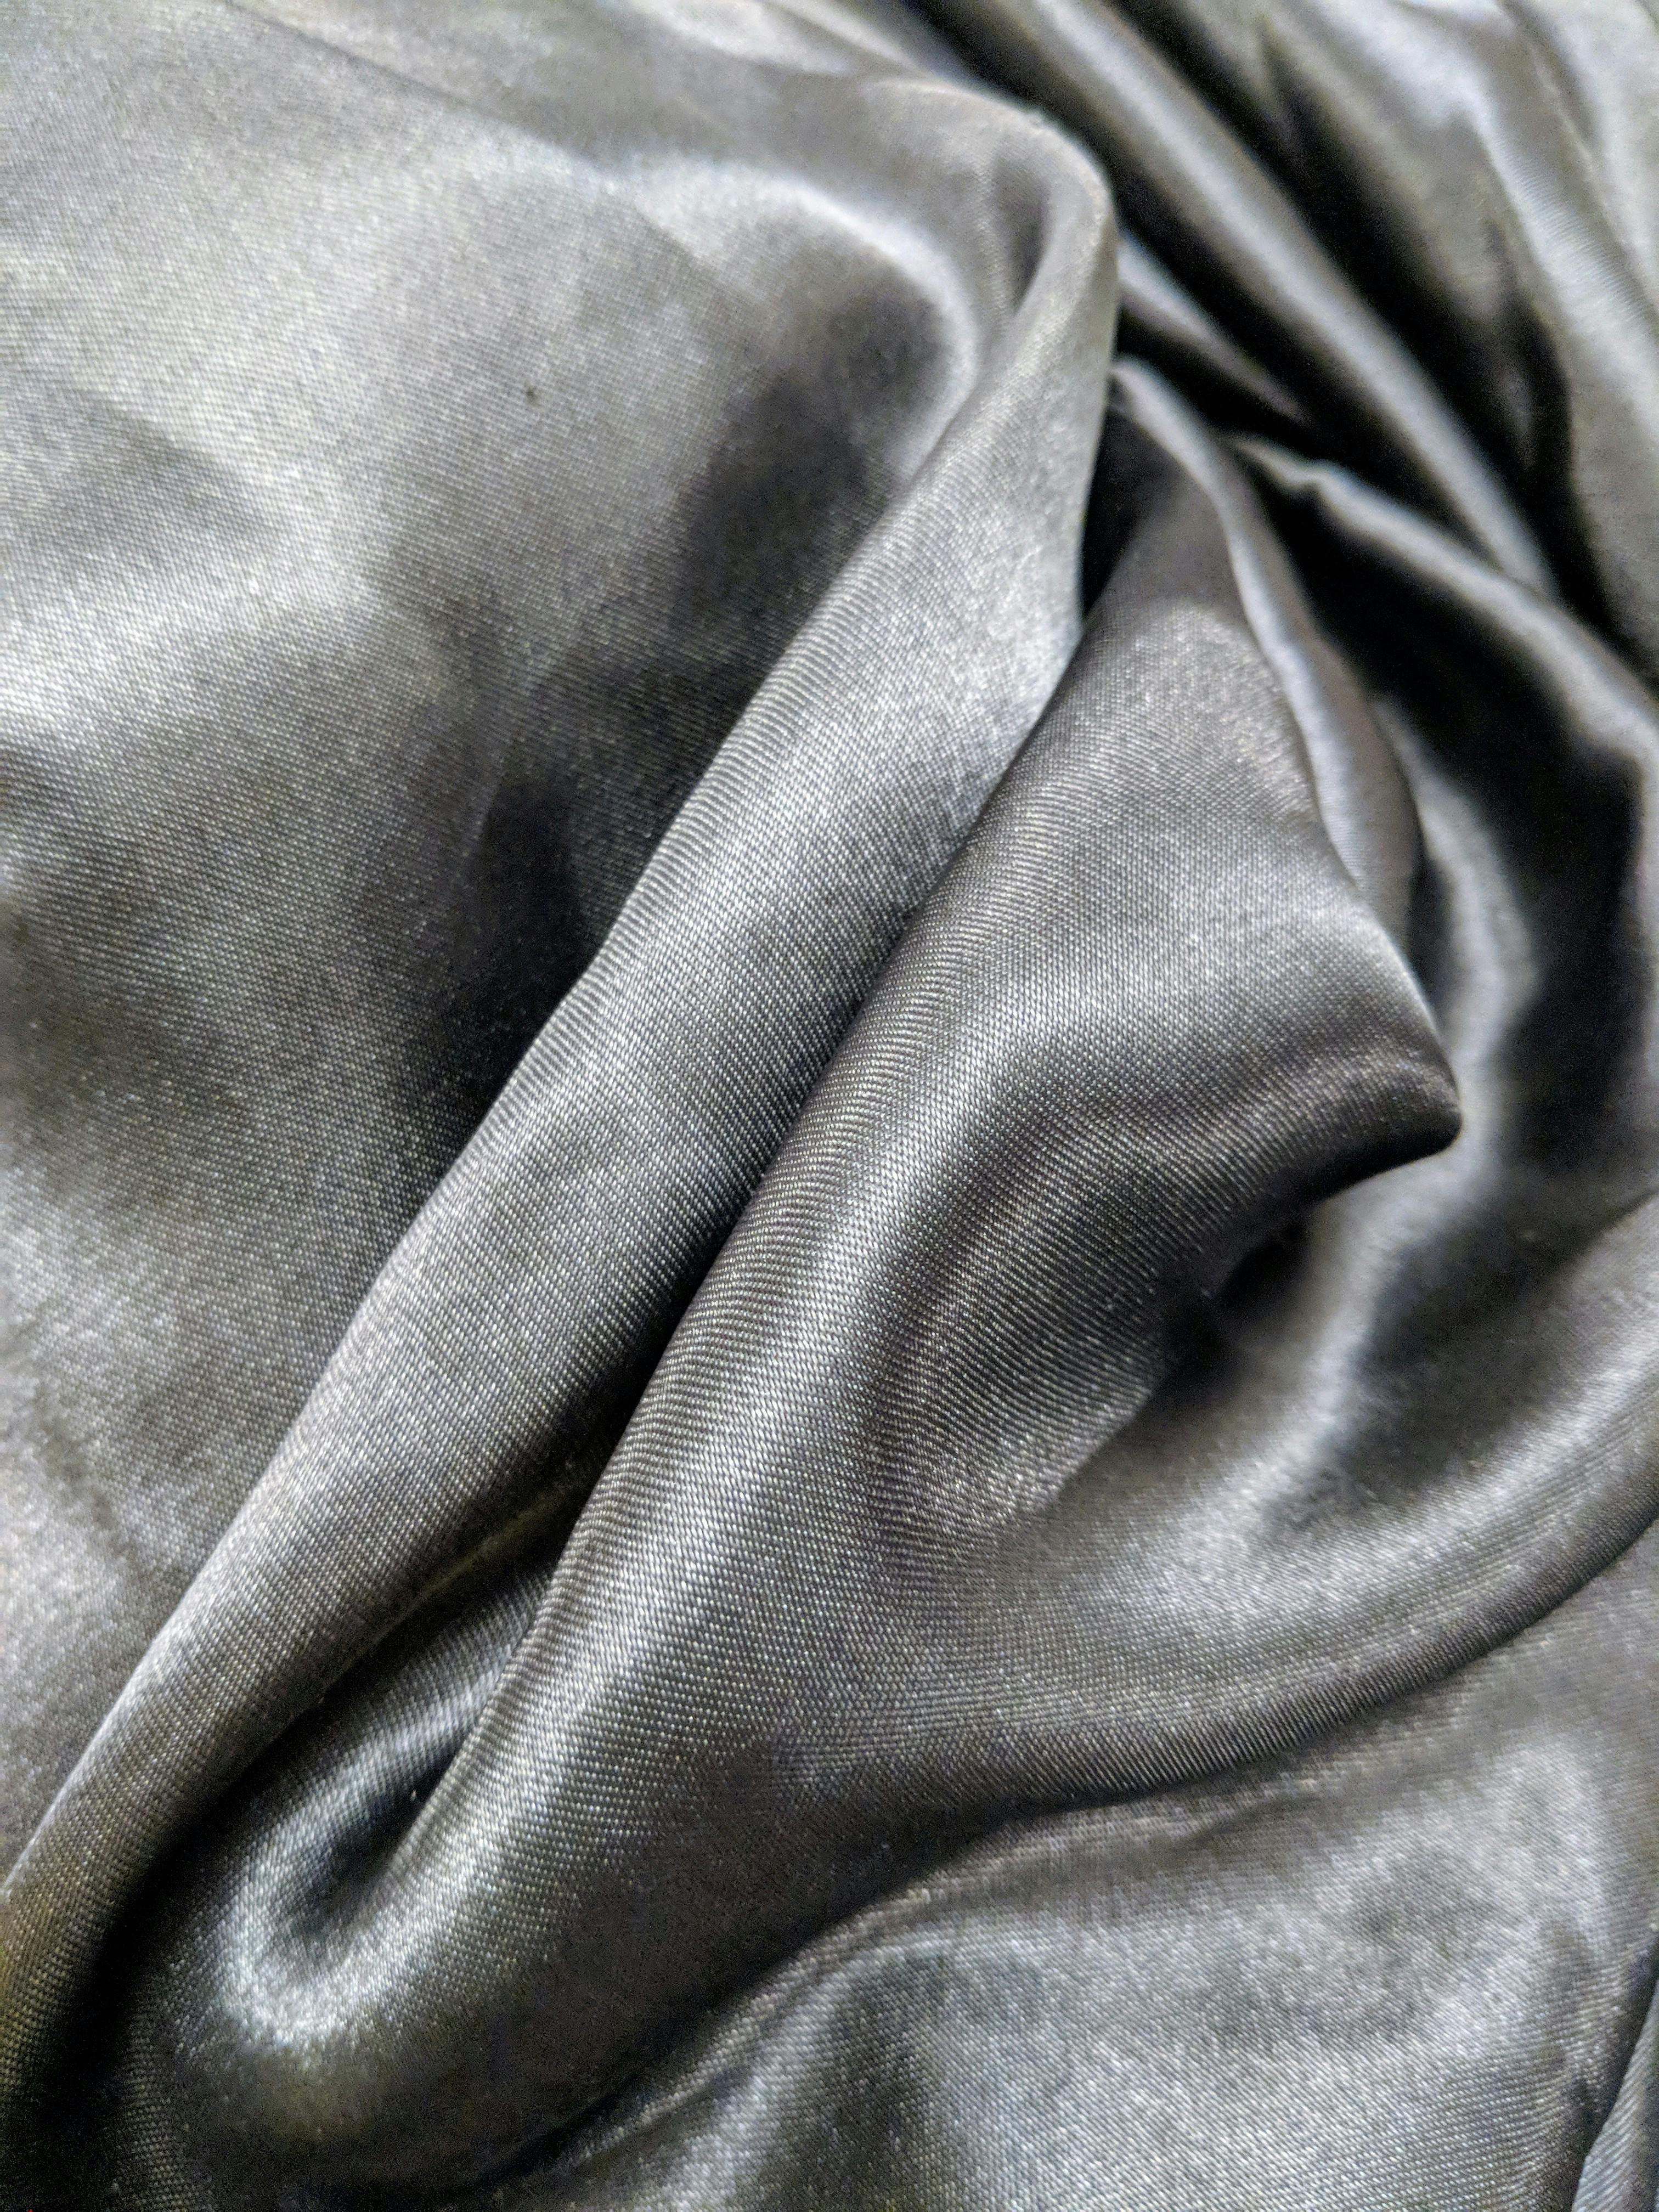 Free stock photo of grayscale, satin sheets